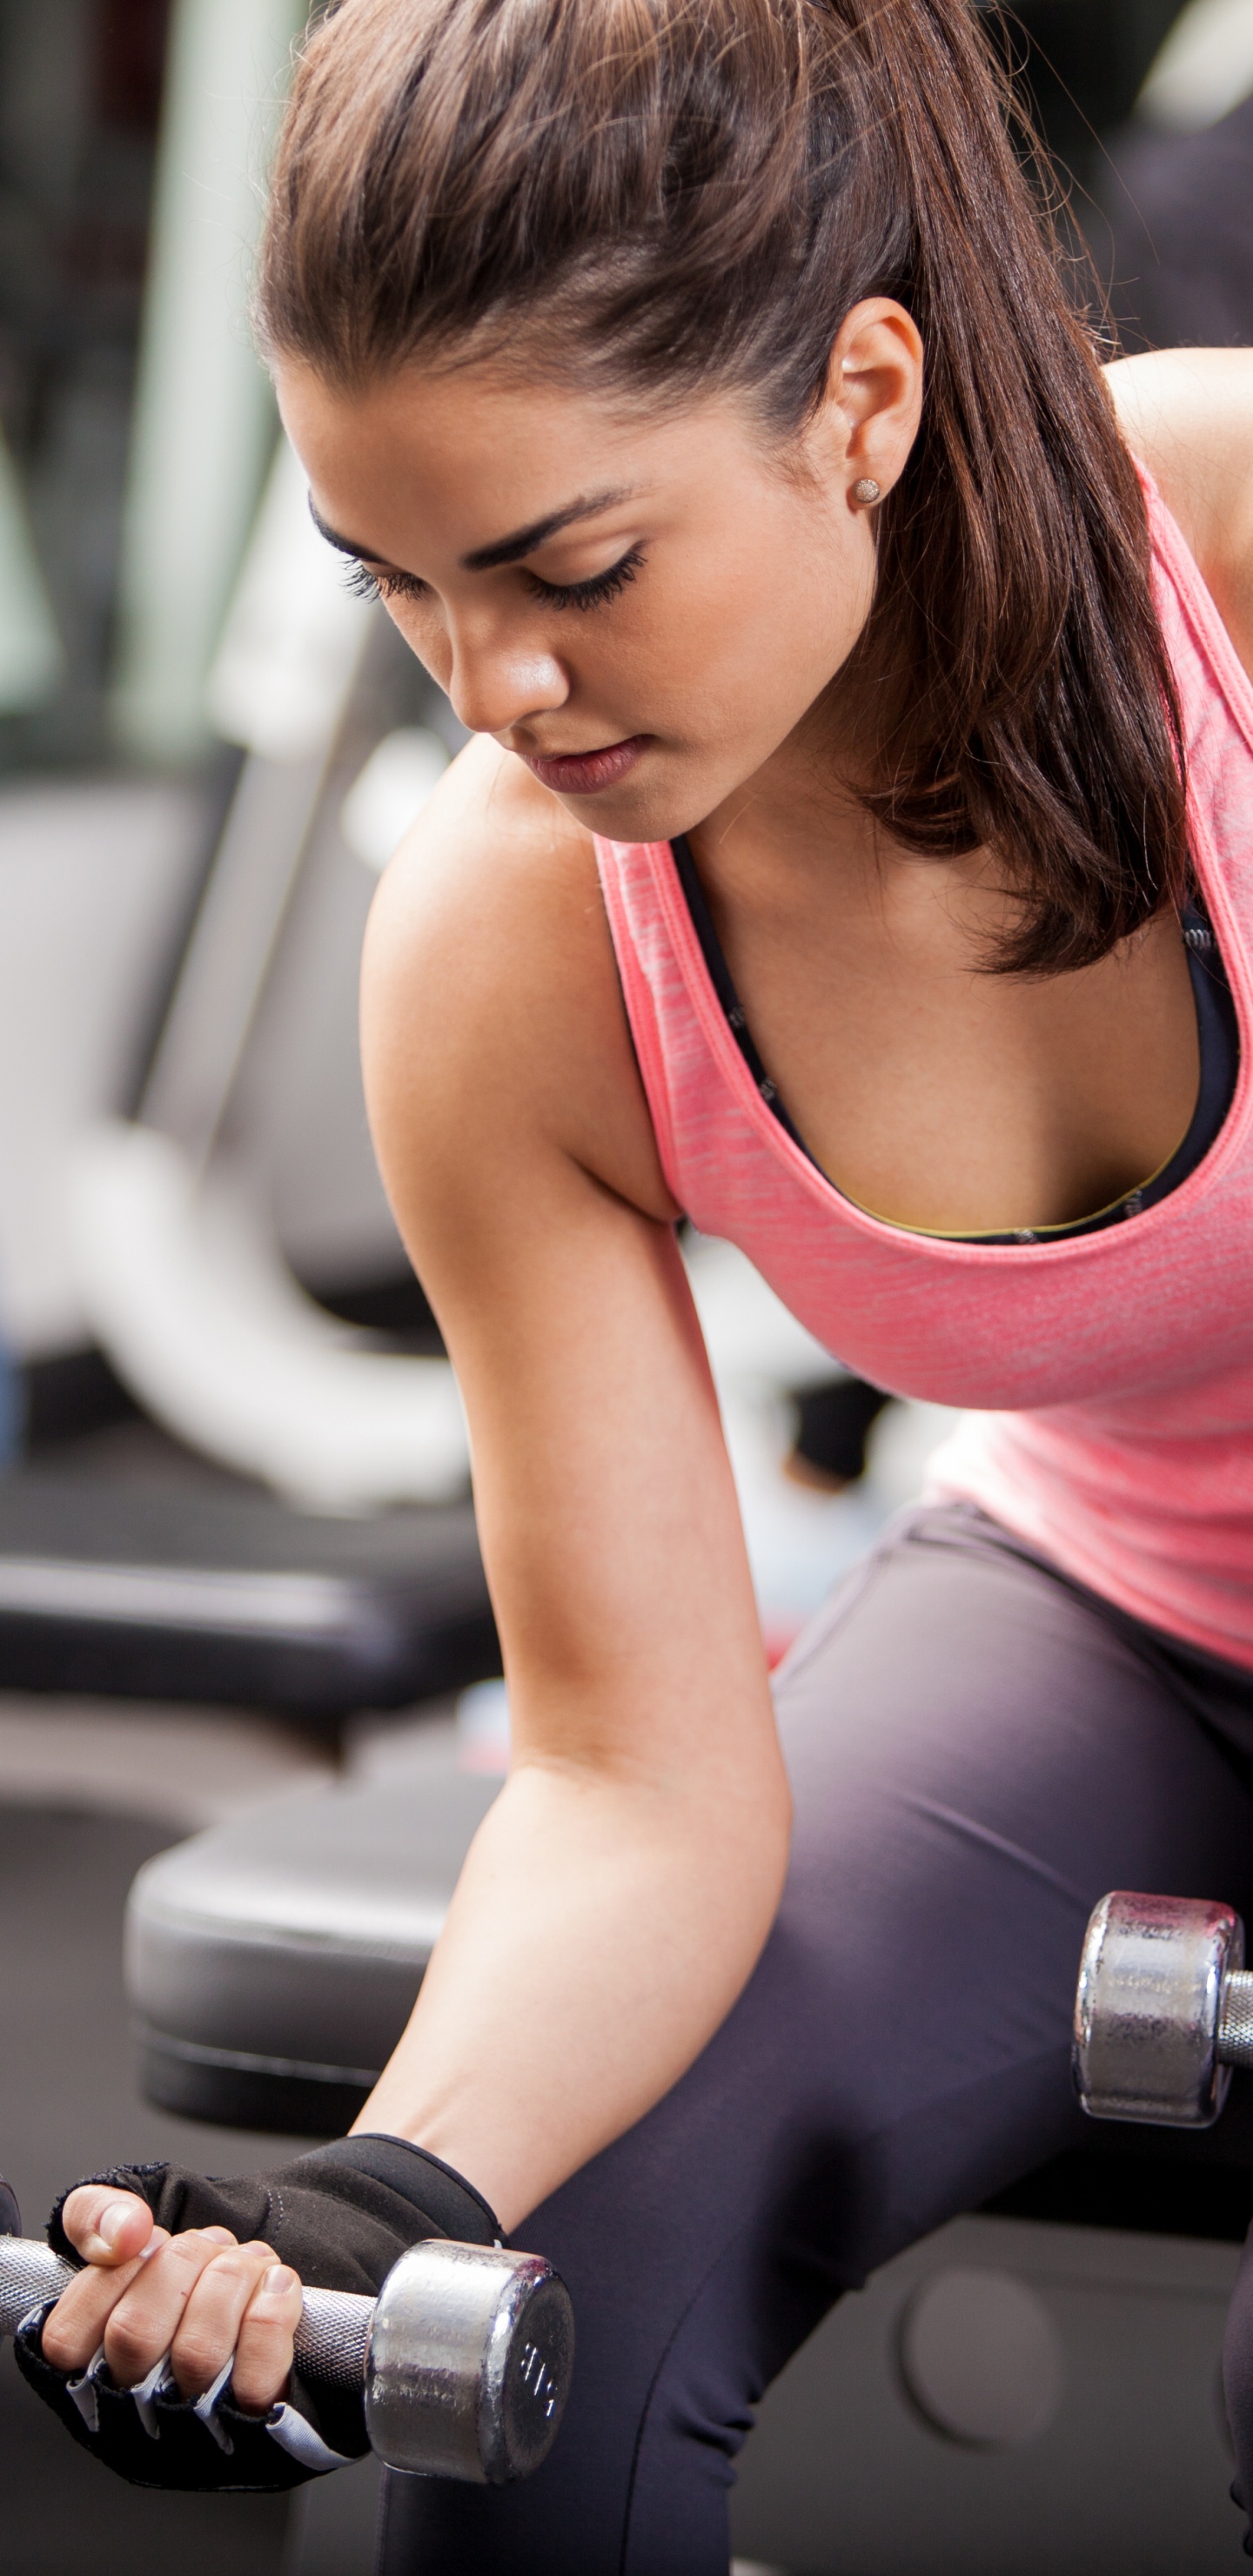 Woman in Pink Tank Top Holding Dumbbell. Wallpaper in 1440x2960 Resolution